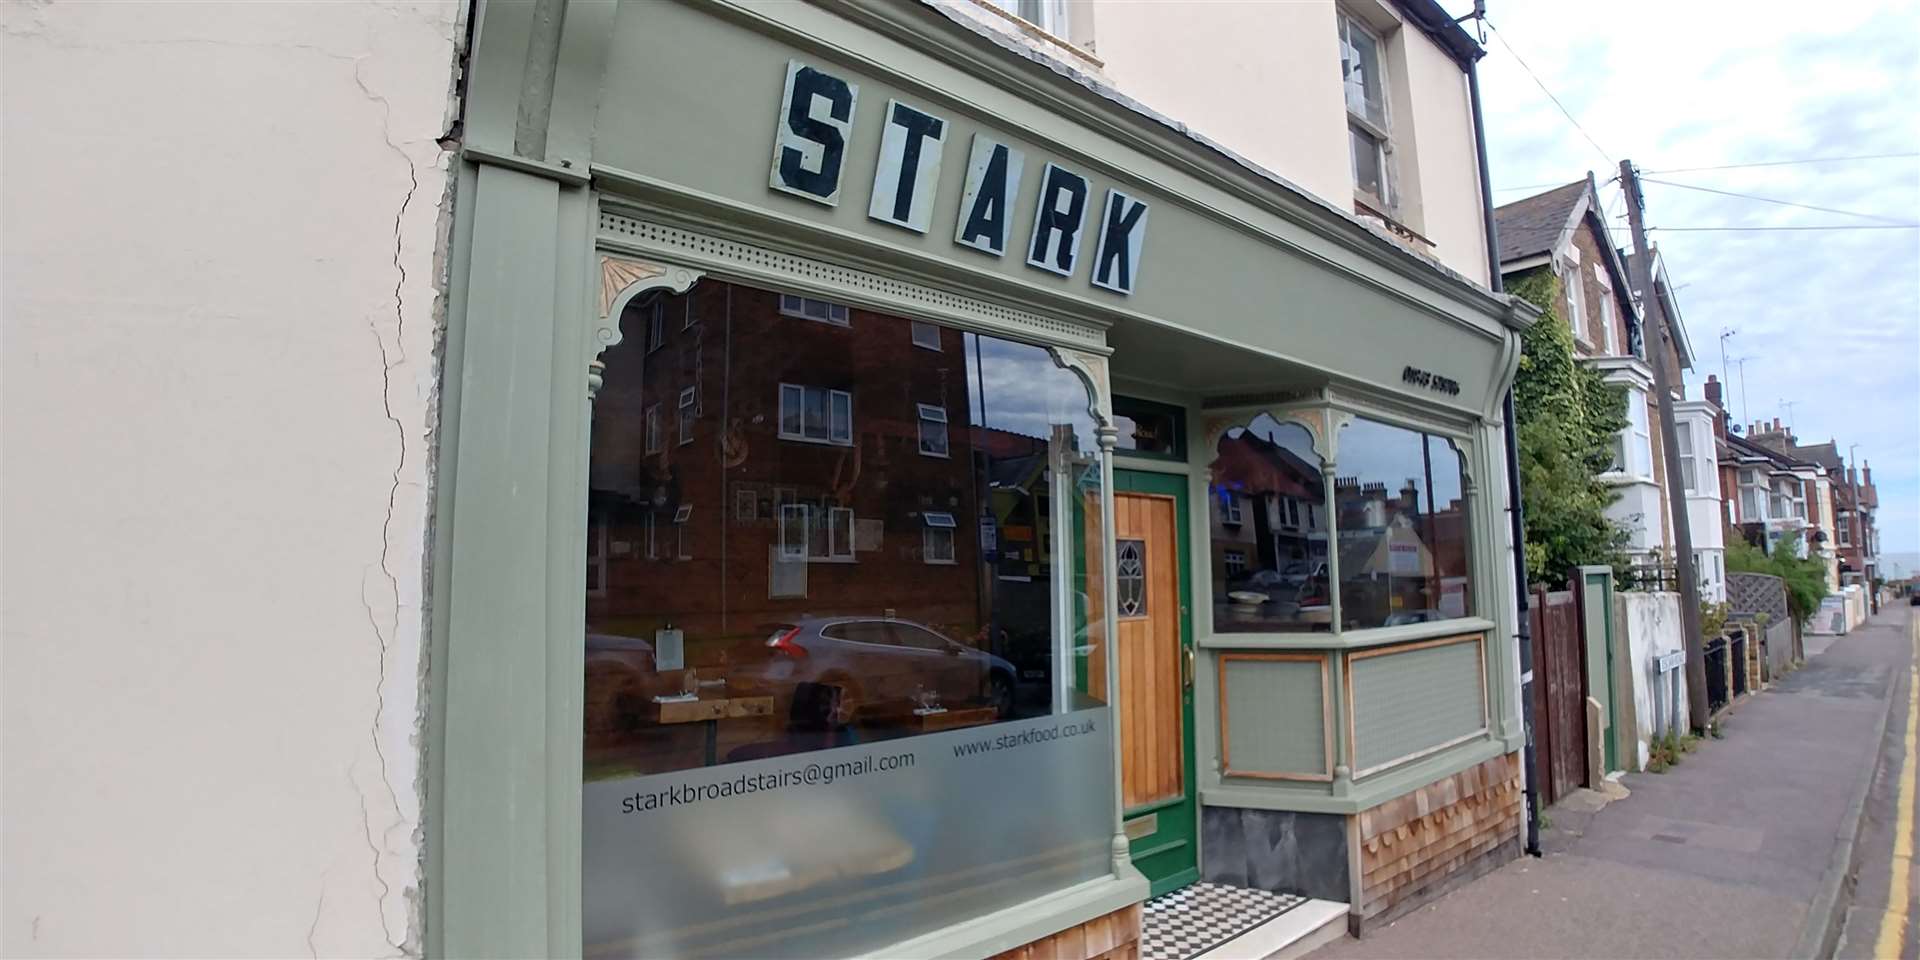 Stark in Broadstairs not only has a Michelin star - but a Harrison Oven too